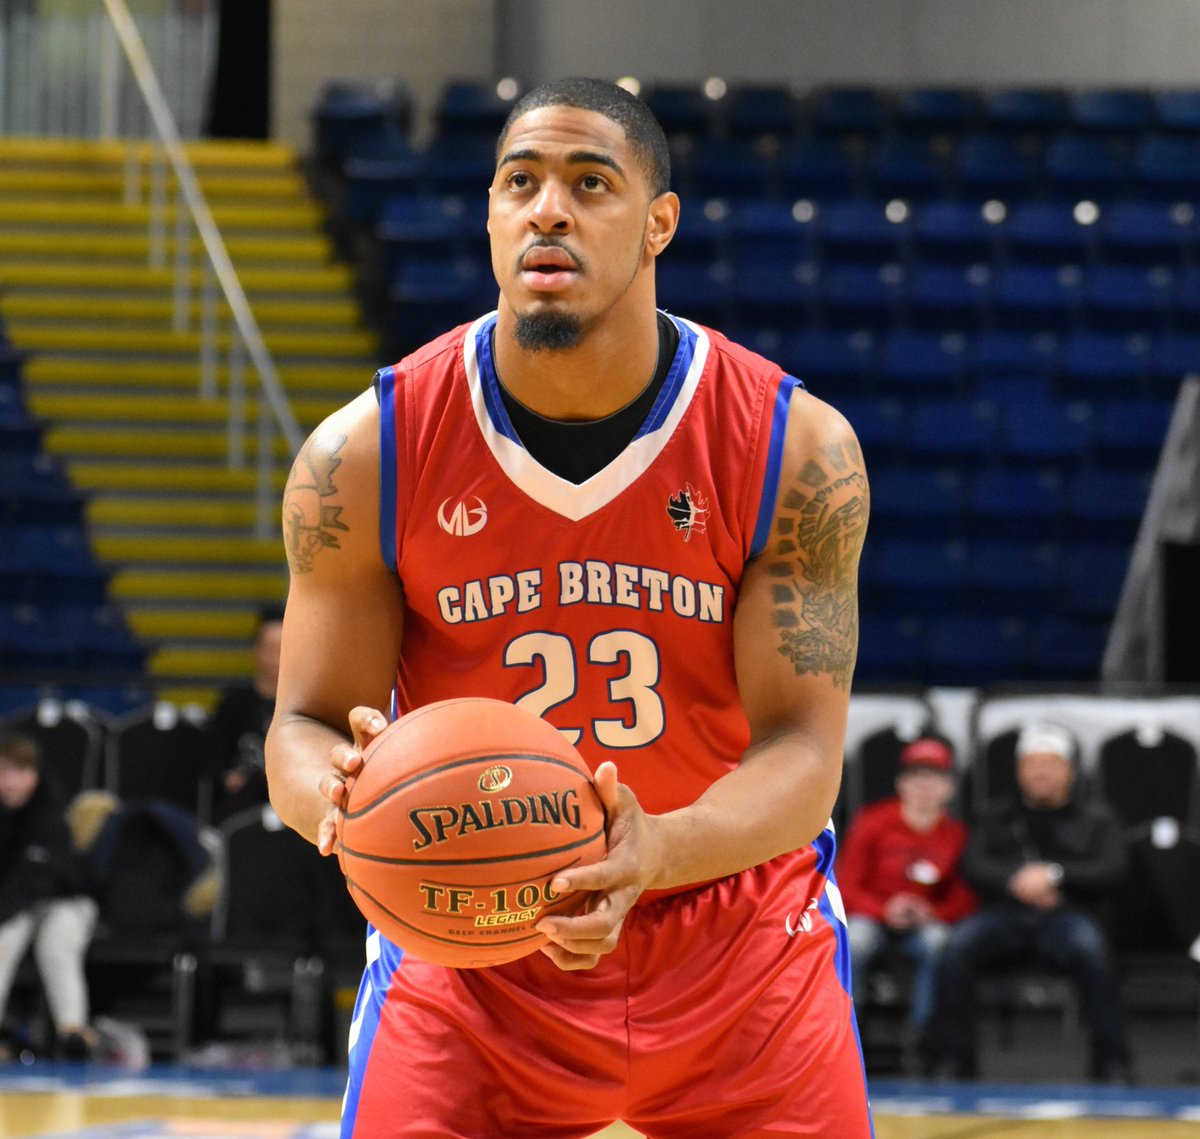 Former @cbhighlanders' Chris Johnson, currently of the @hfxhurricanes, was named to the @NBLCanada All-Canadian second team. #CapeBreton #Highlanders #Halifax #Hurricanes